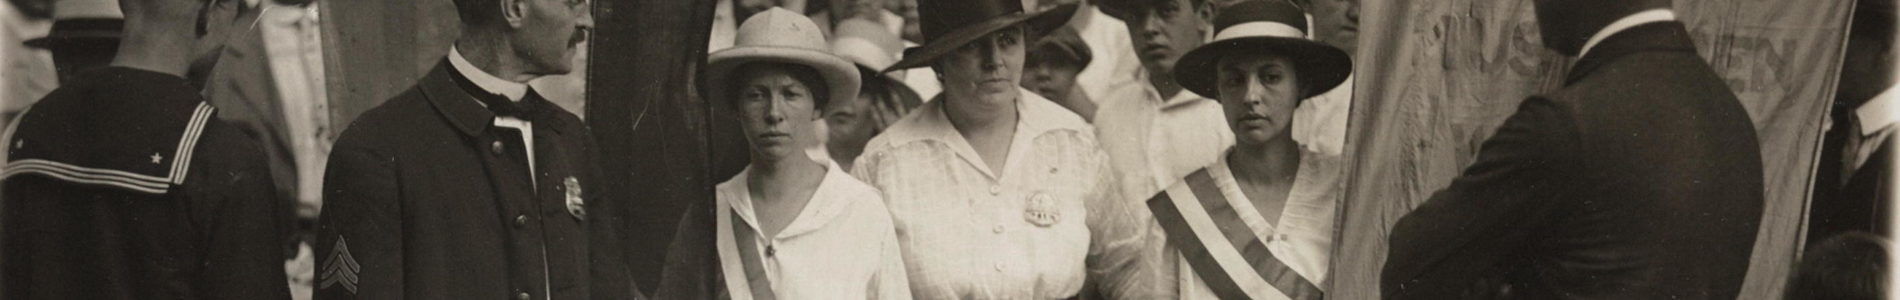 Catherine Flanagan (left) and Madeleine Watson (right) of the National Woman's Party being arrested by police officer (center) as they picket with banners in front of the White House East Gate